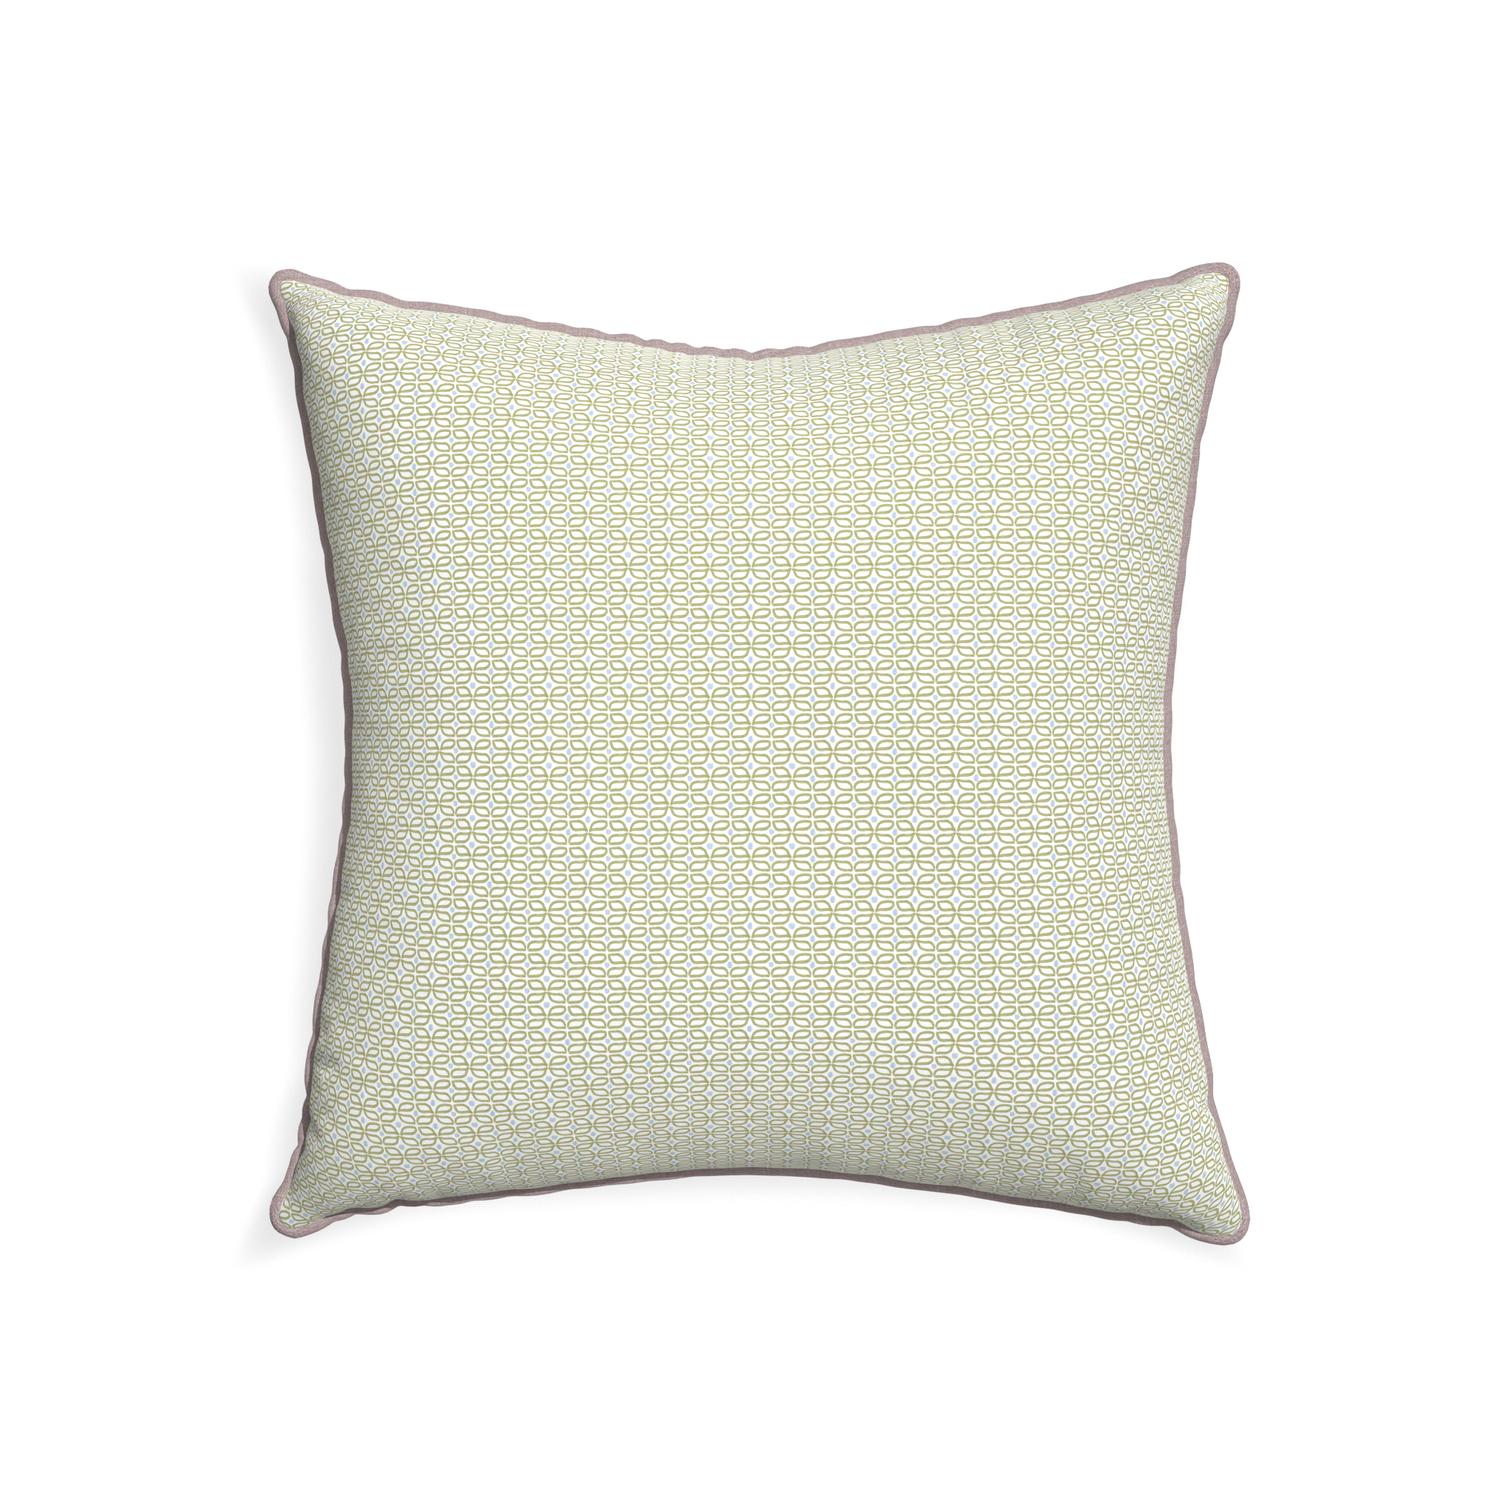 22-square loomi moss custom moss green geometricpillow with orchid piping on white background